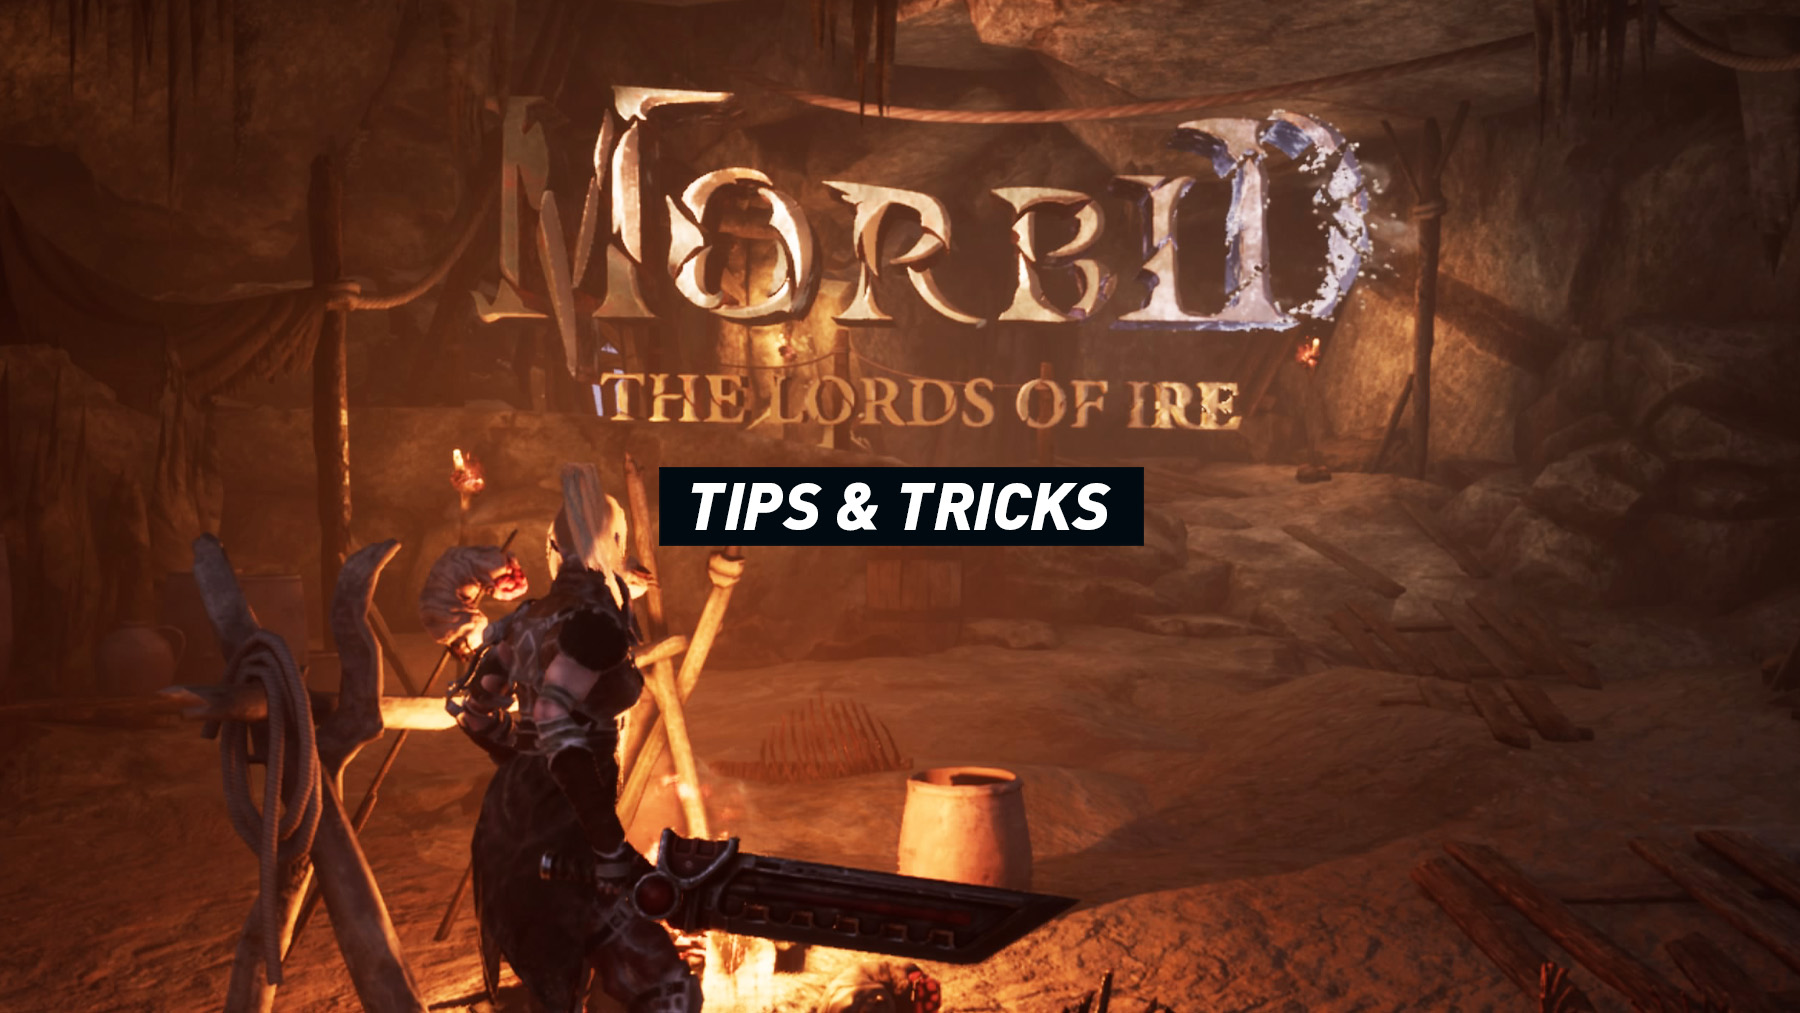 Morbid: The Lords of Ire – Tips